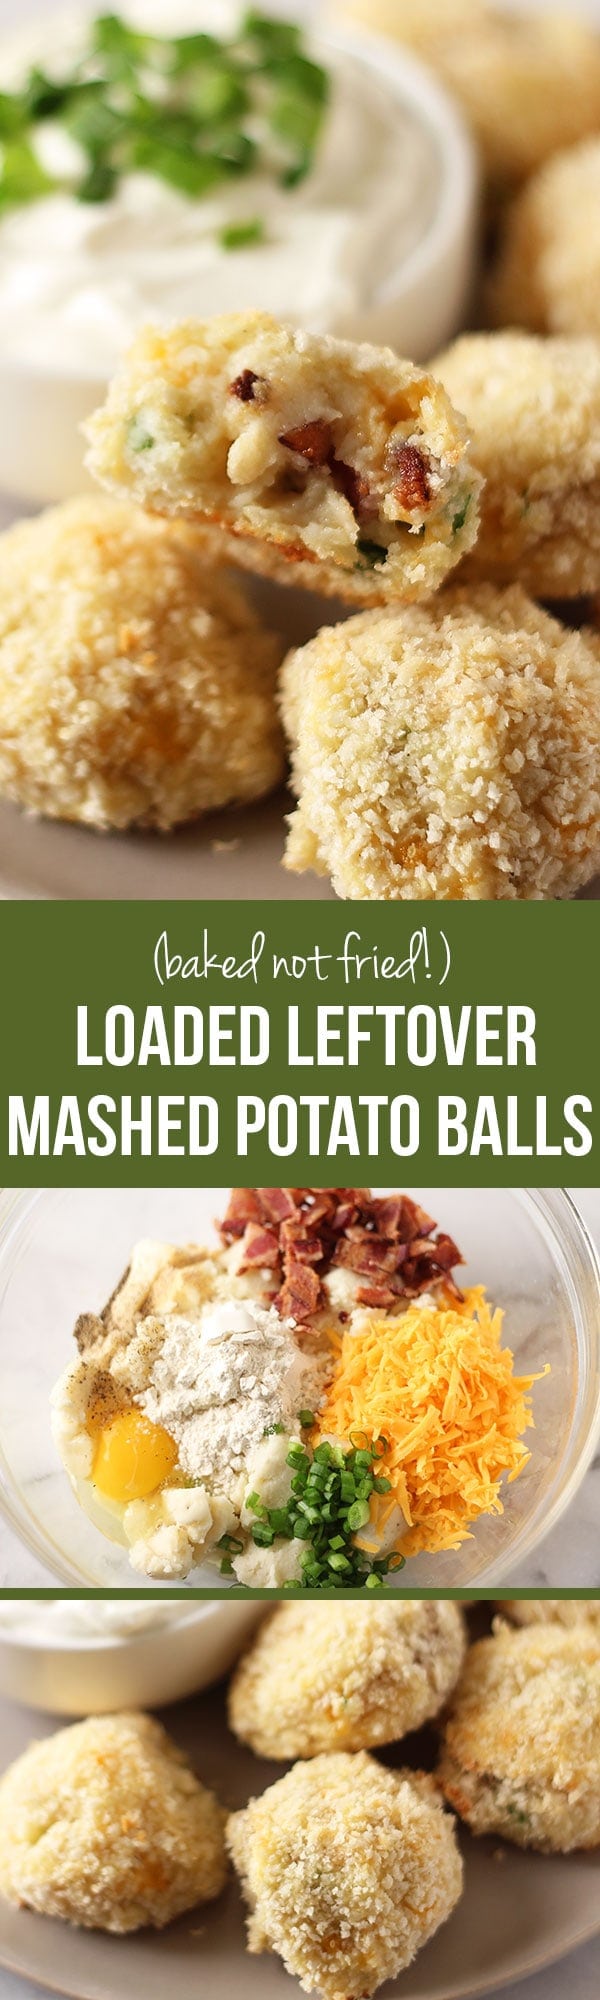 THANKSGIVING LEFTOVER RECIPE! Loaded Leftover Mashed Potato Balls take advantage of extra Thanksgiving mashed potatoes by turning them into something even better. Baked, not fried! With cheddar, bacon, onion, and sour cream!